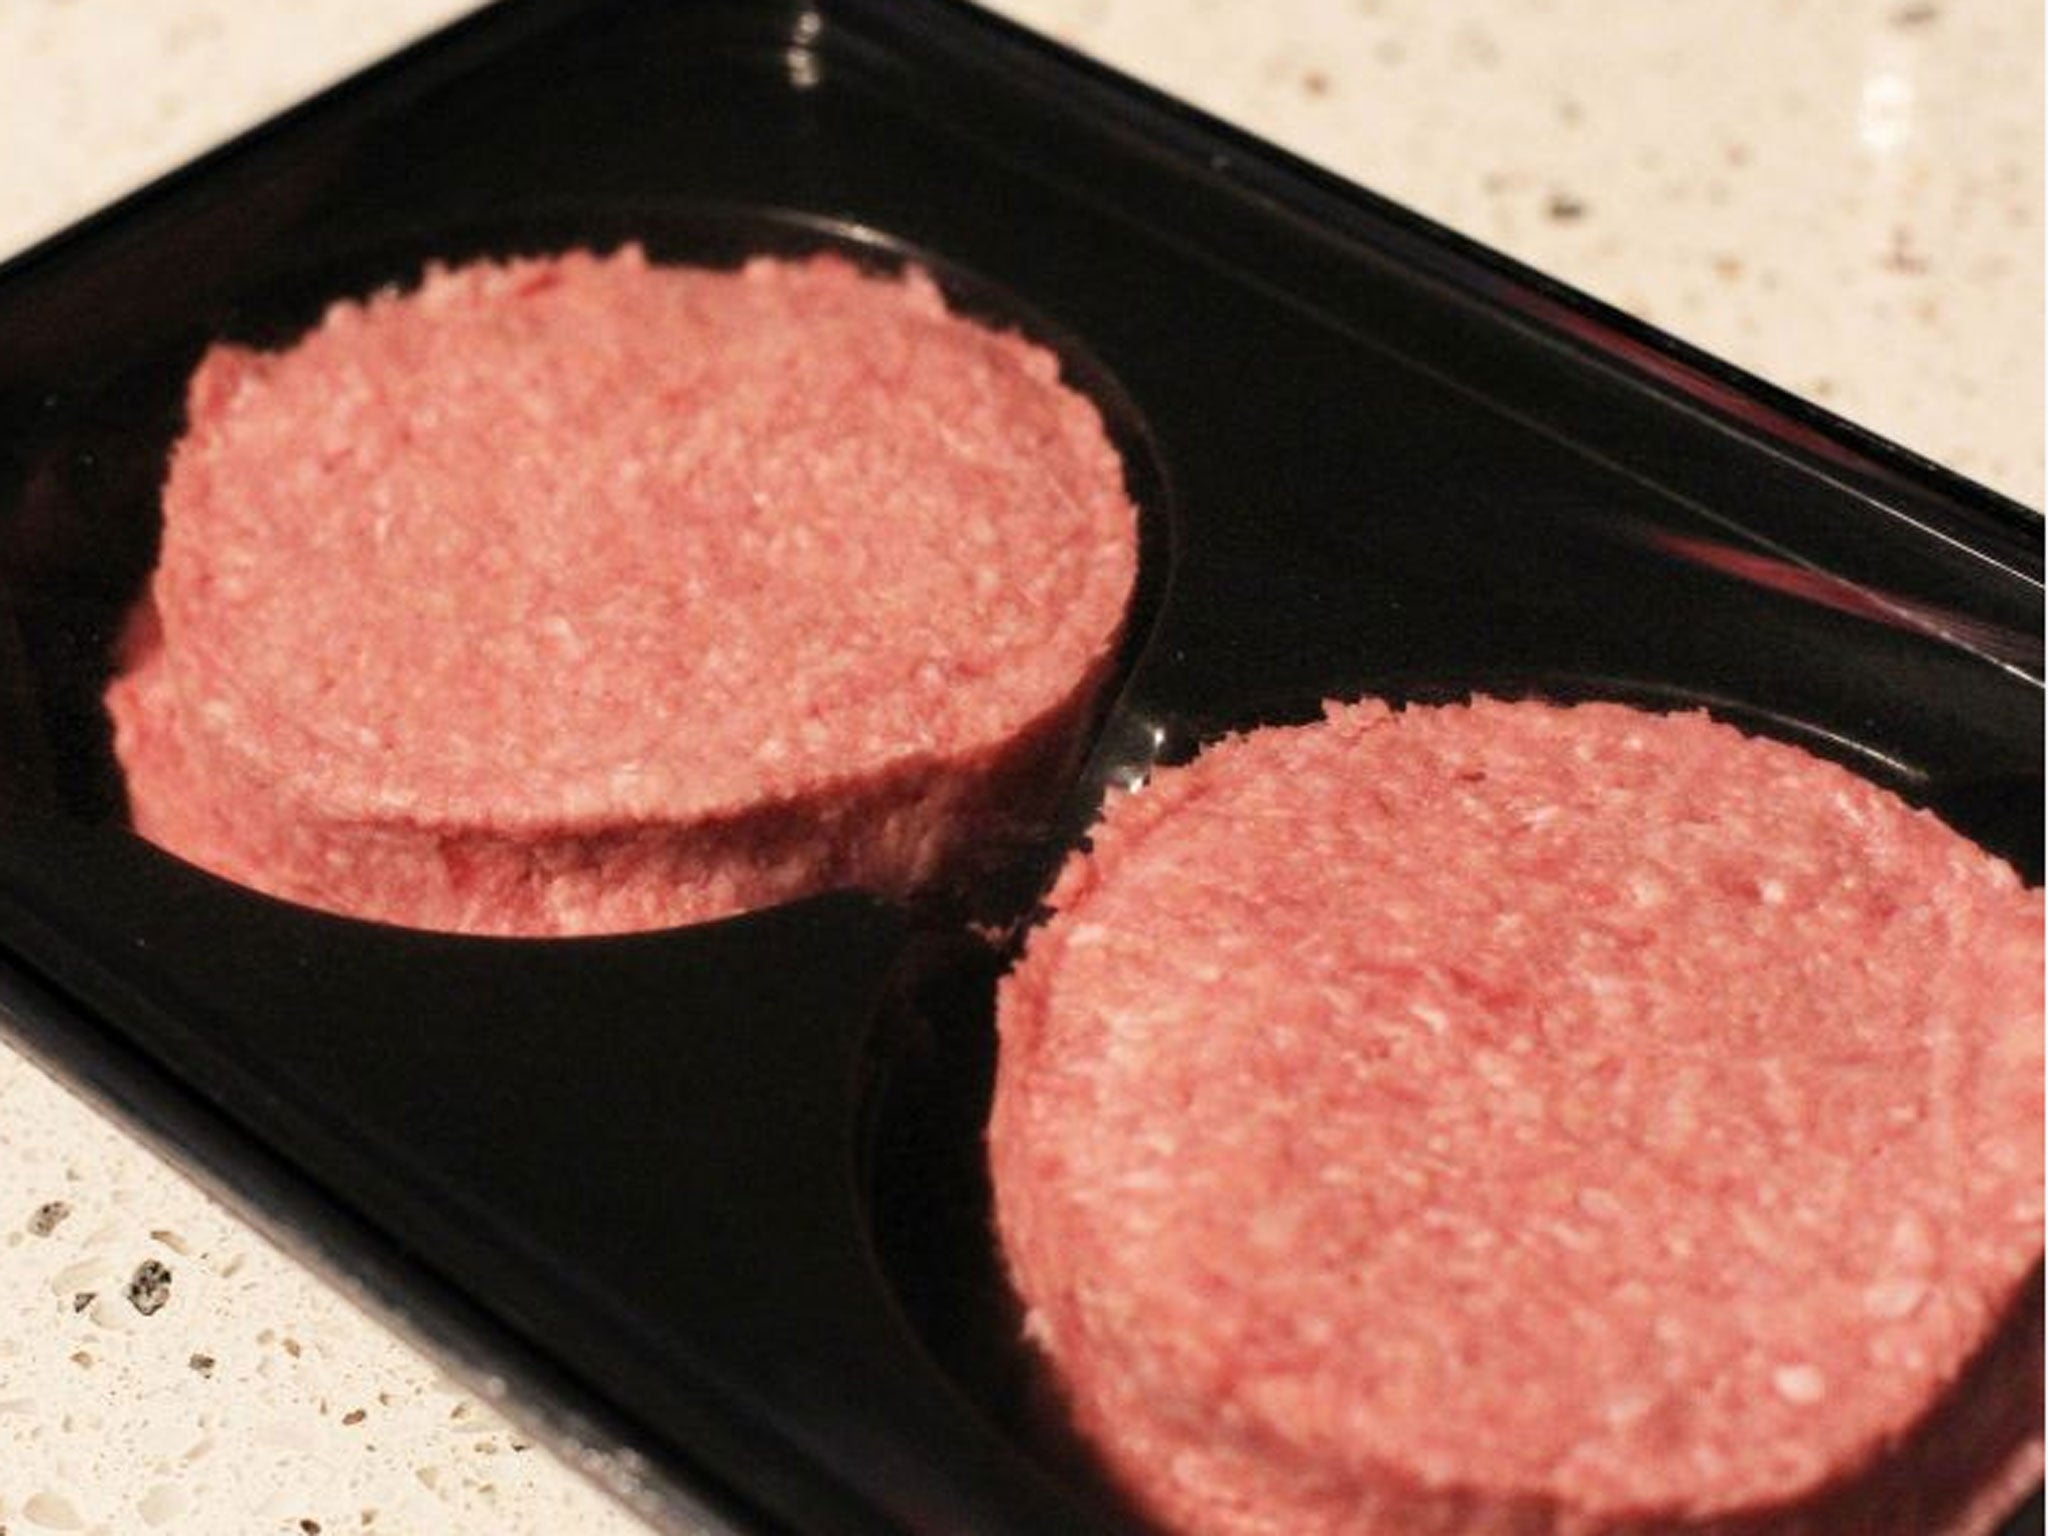 51 per cent of carnivores said they would be happy to eat horse meat, as long as it was labelled properly